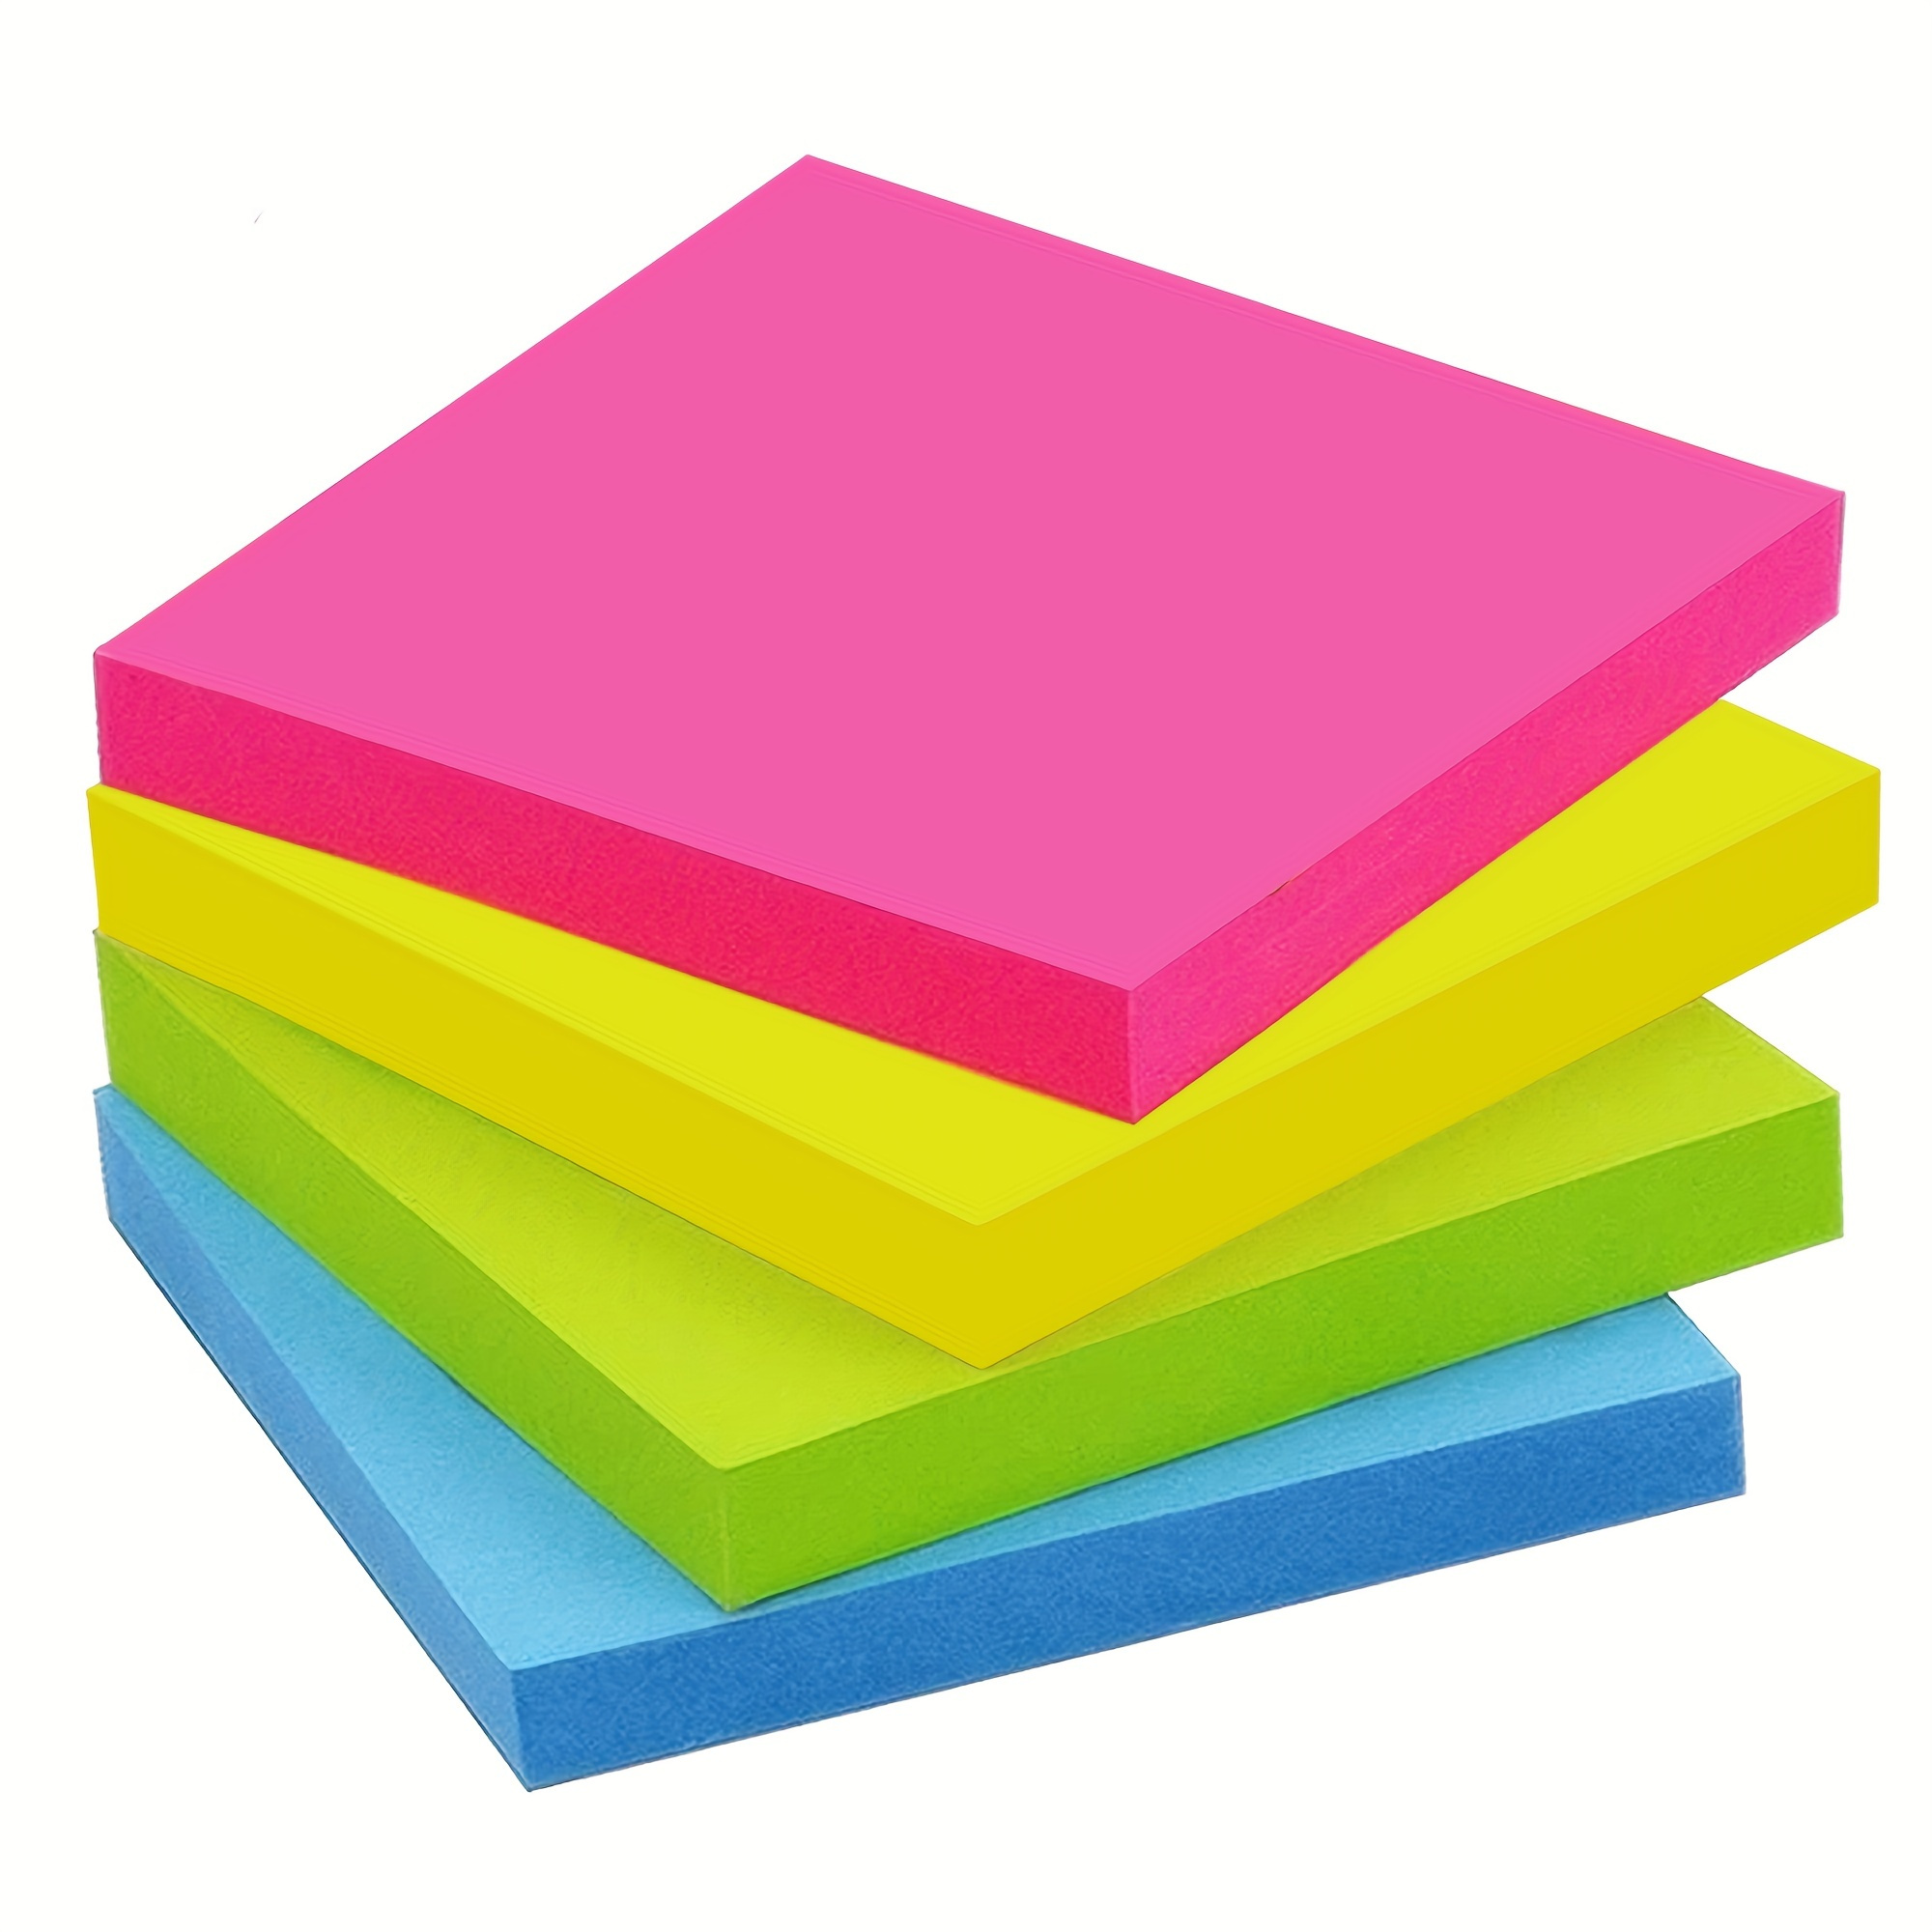 

Sticky Notes 3x3 Inches, Bright Colors Self-stick Pads, Easy To Post For Home, Office, Notebook, 50 Sheets Per Pad, 4 Pads In Total